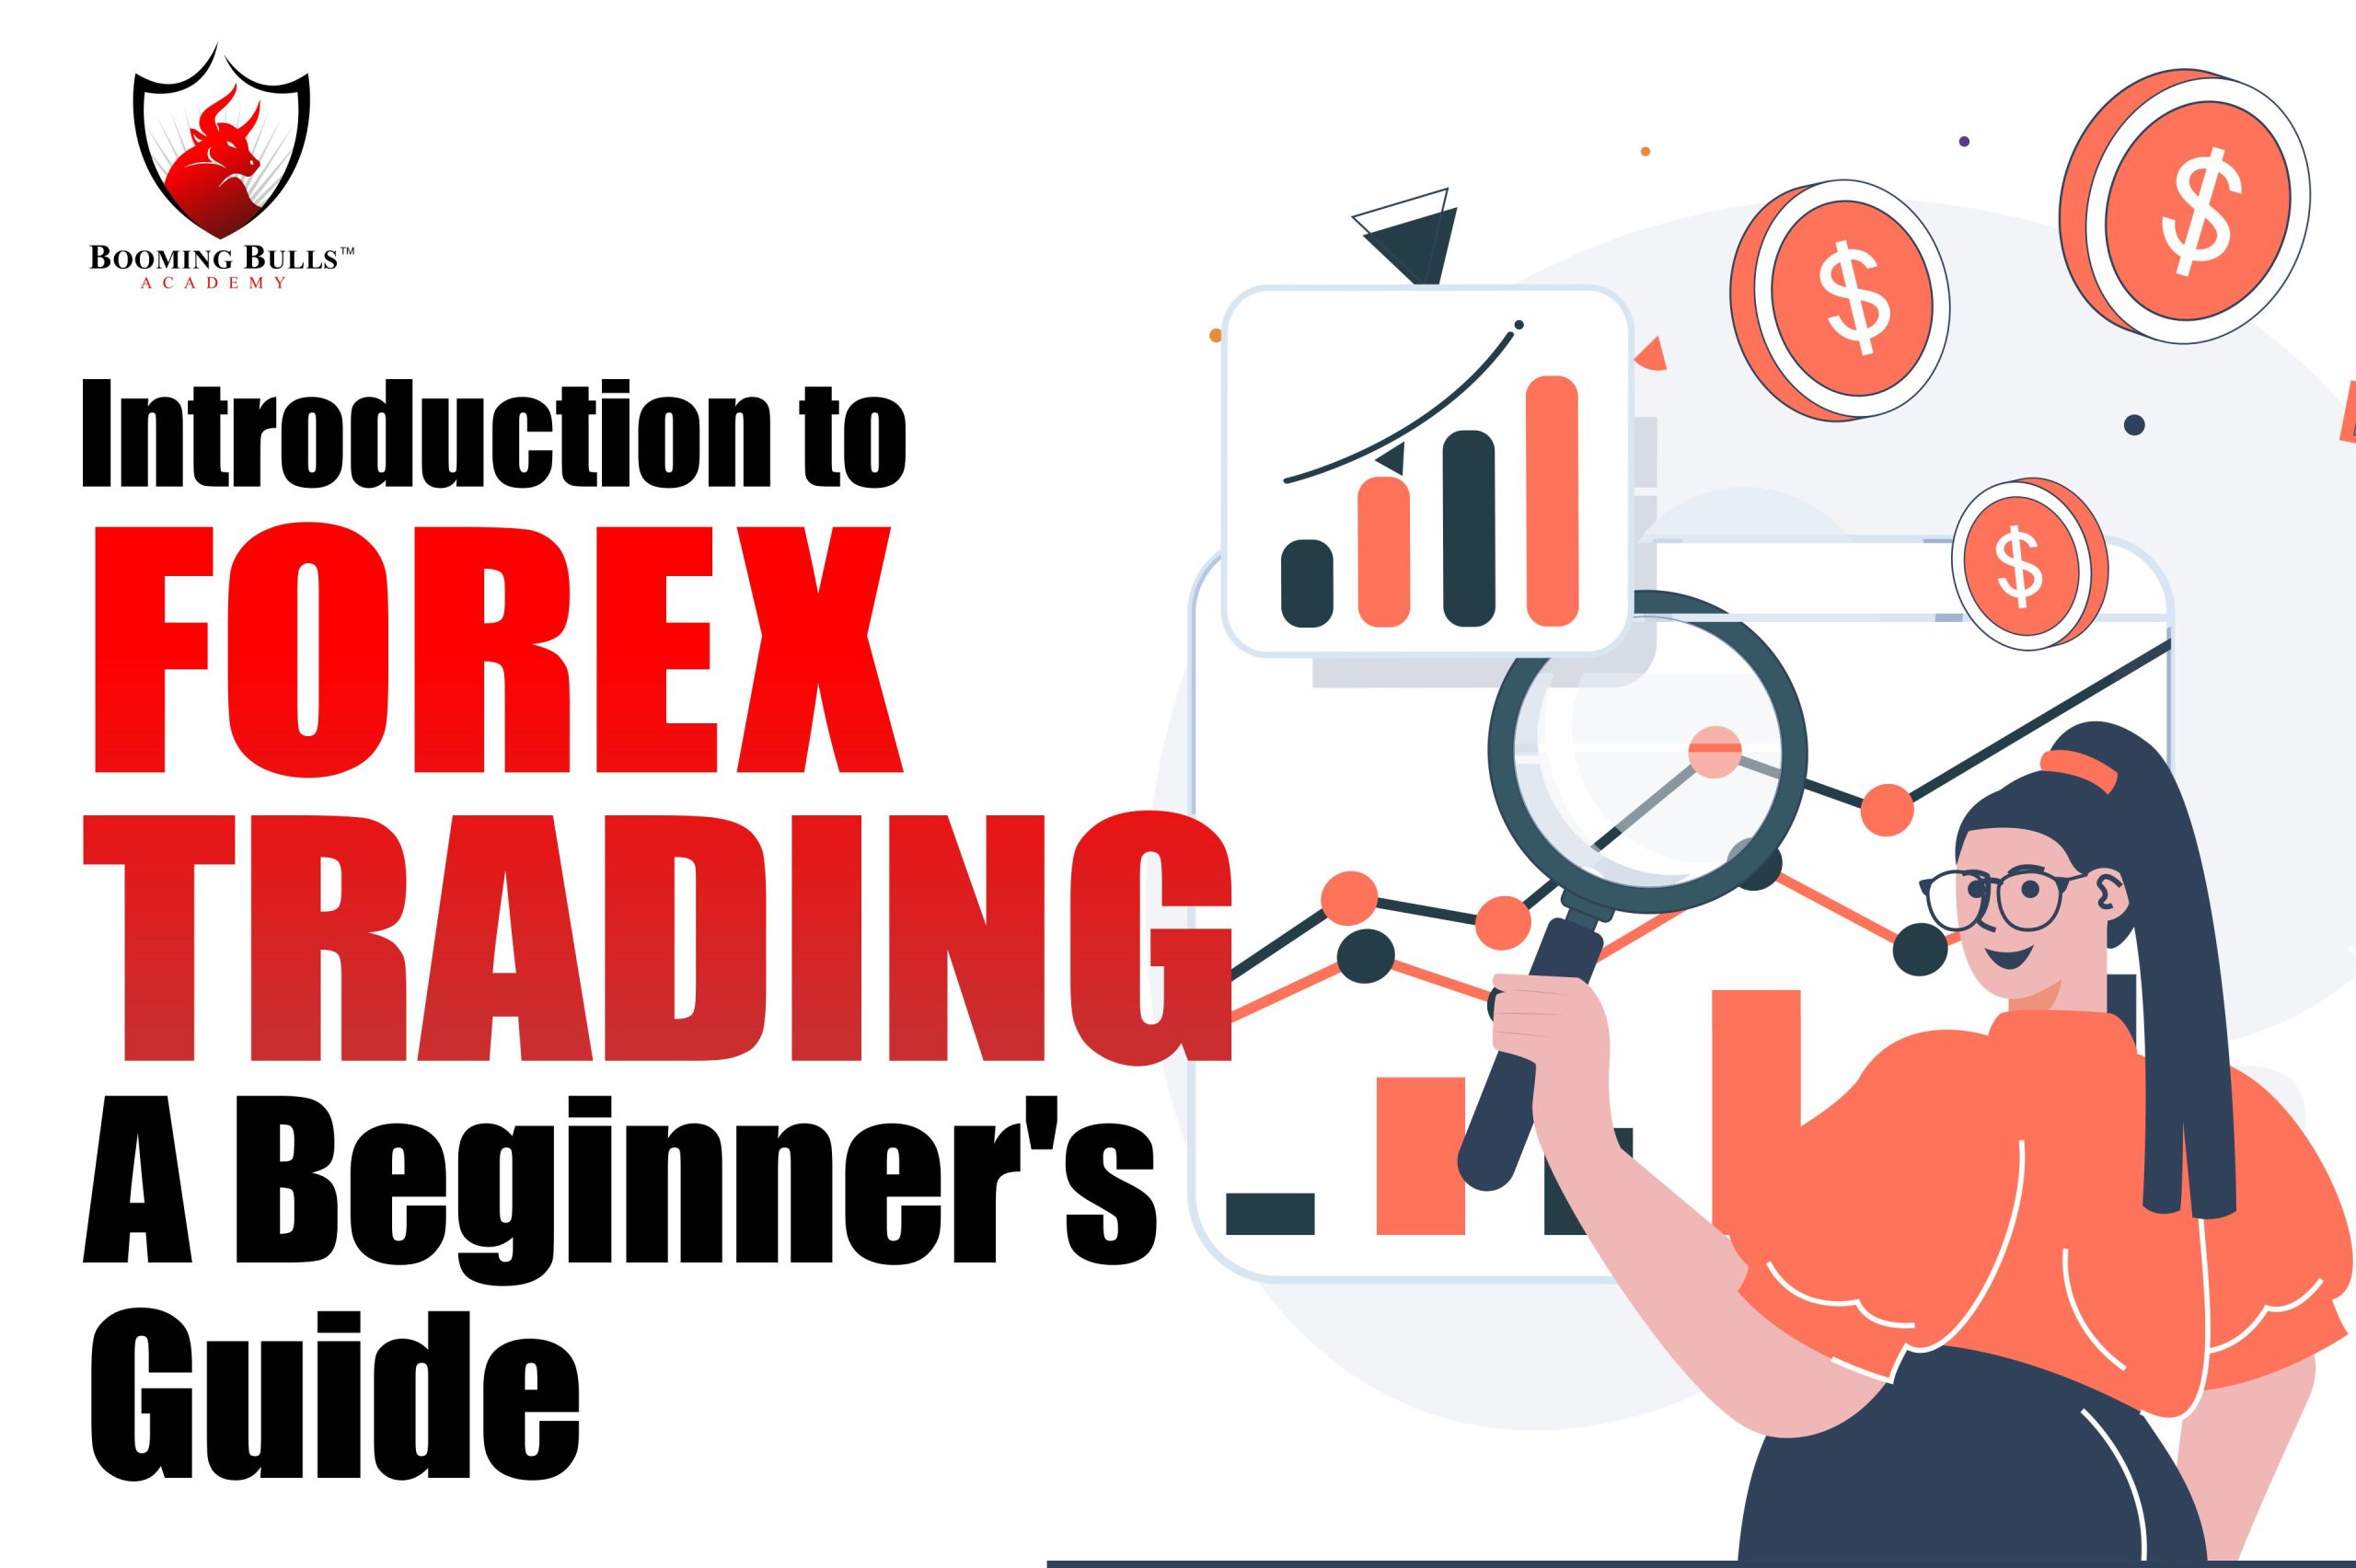 Introduction to Forex Trading: A Beginner’s Guide